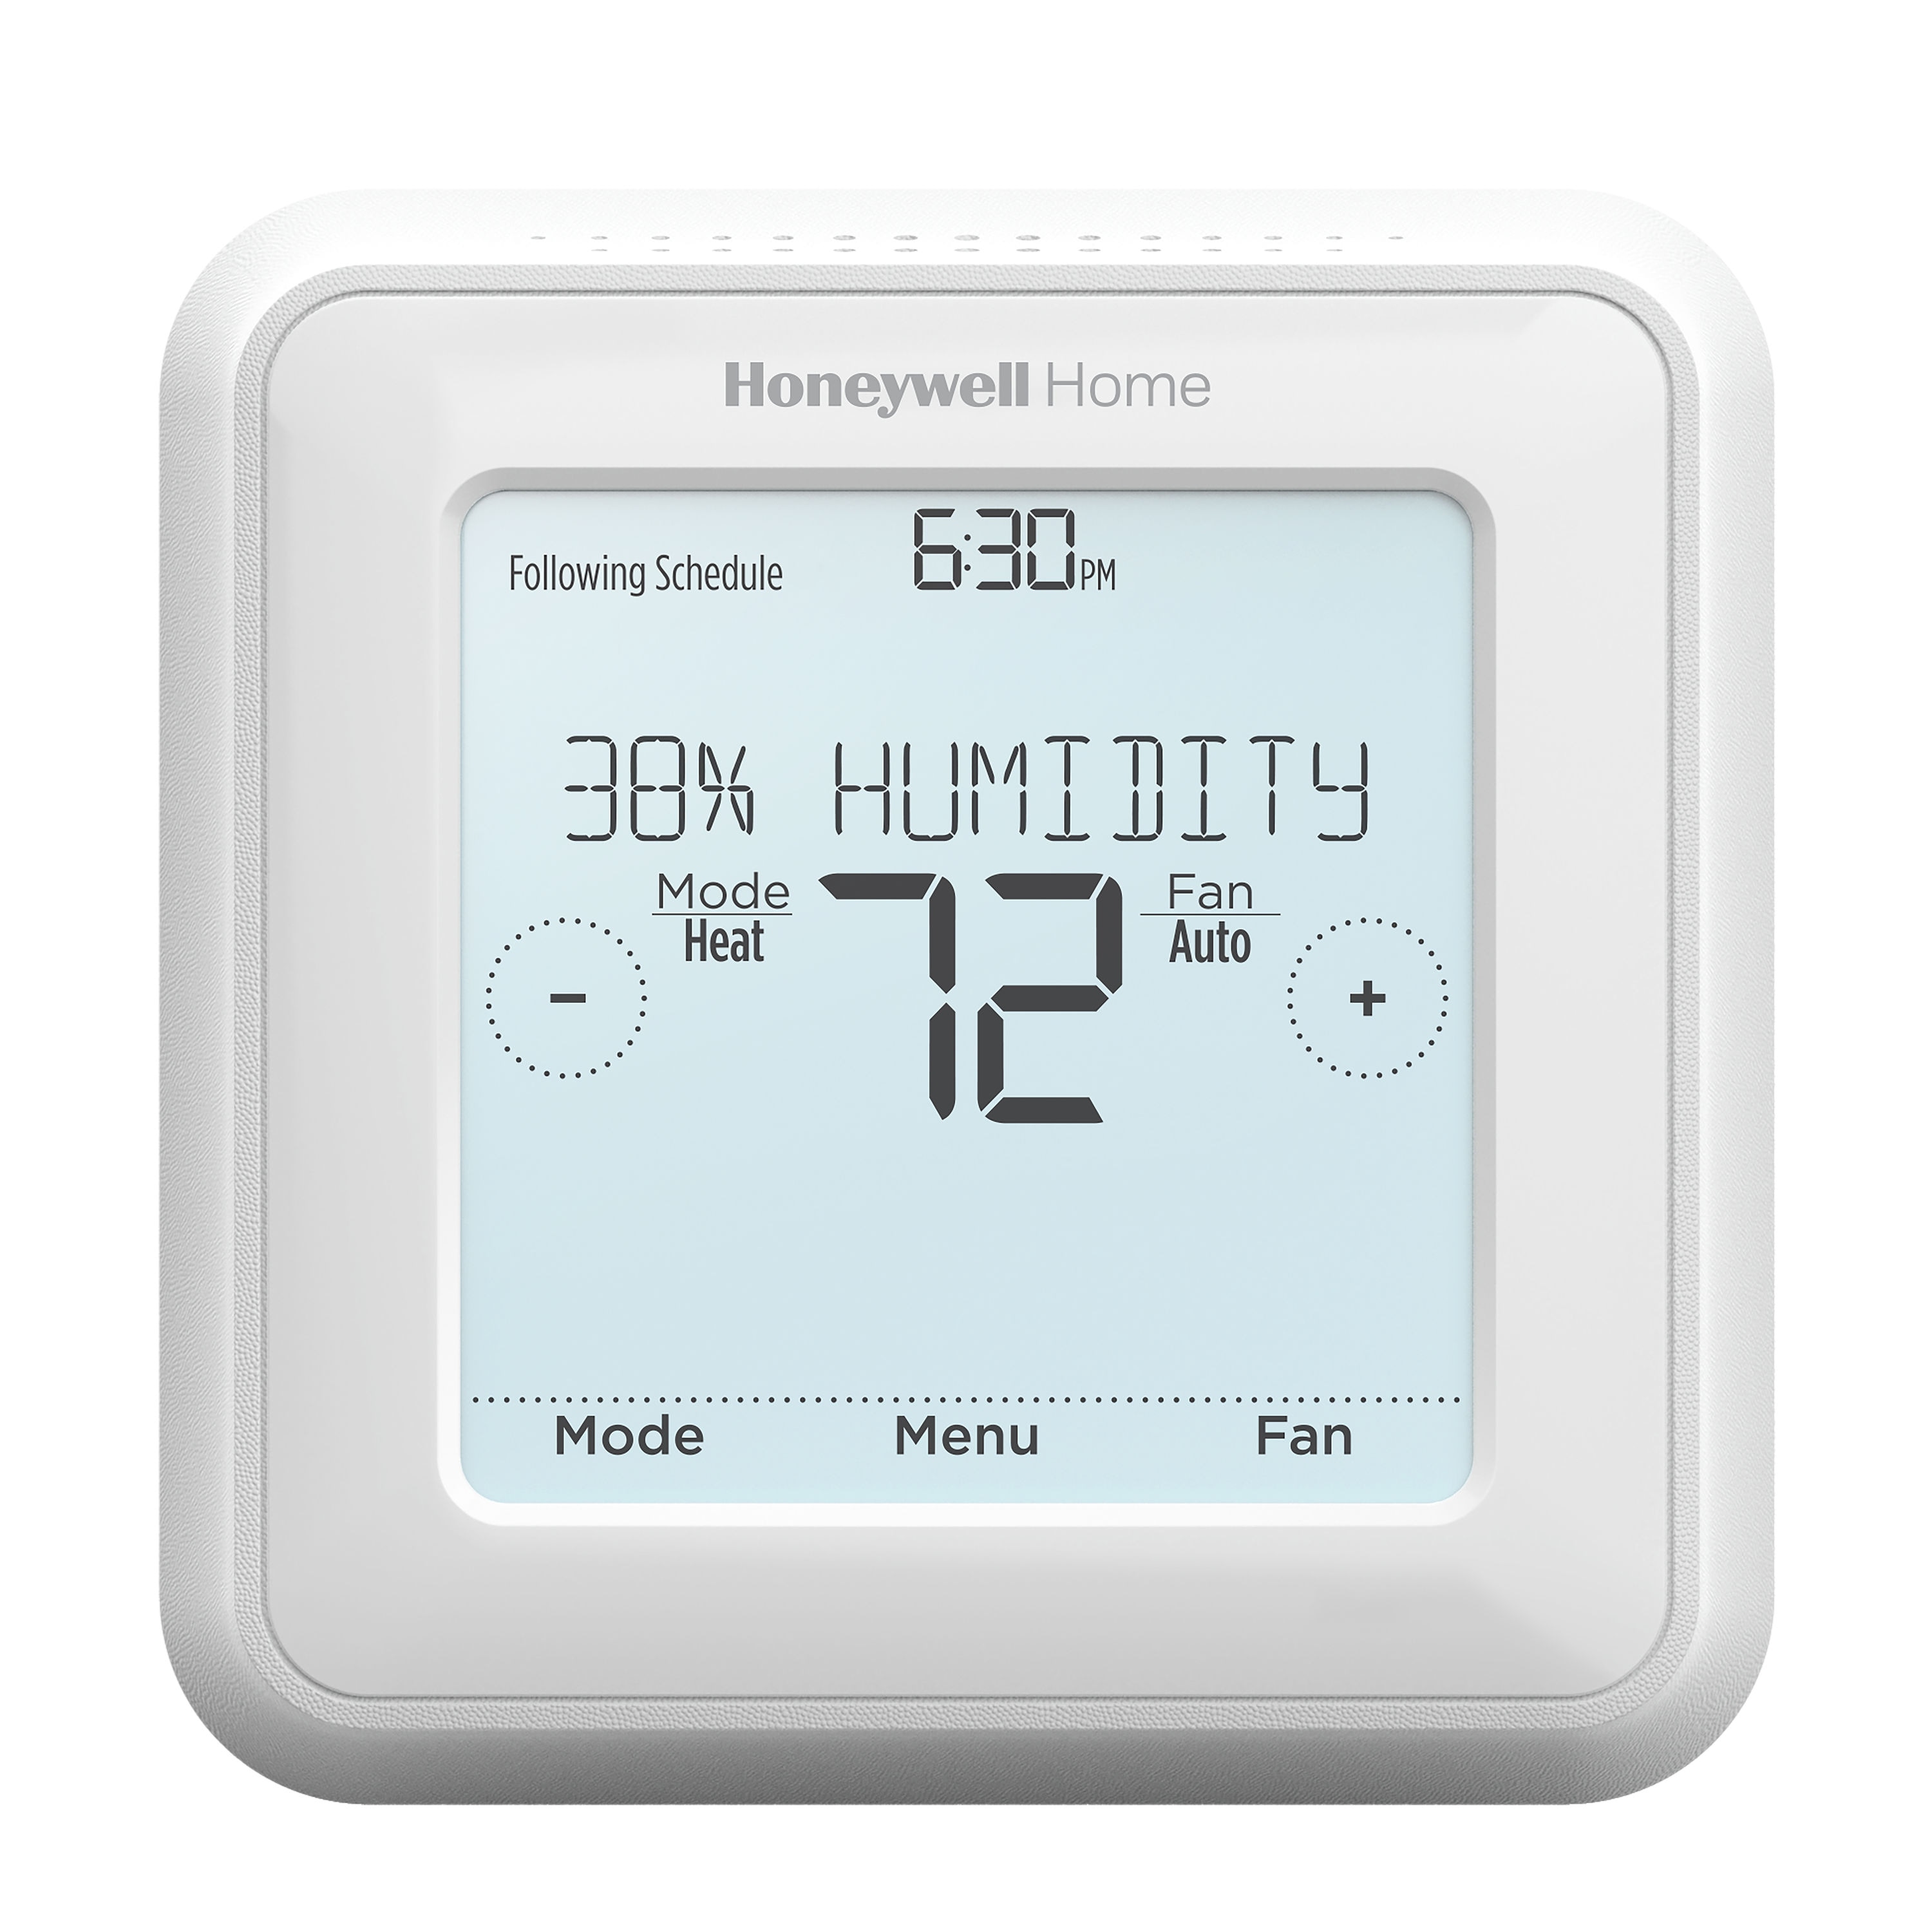 Honeywell Premium extra large Screen Selectable-flexible Touch Screen  Programmable Thermostat at